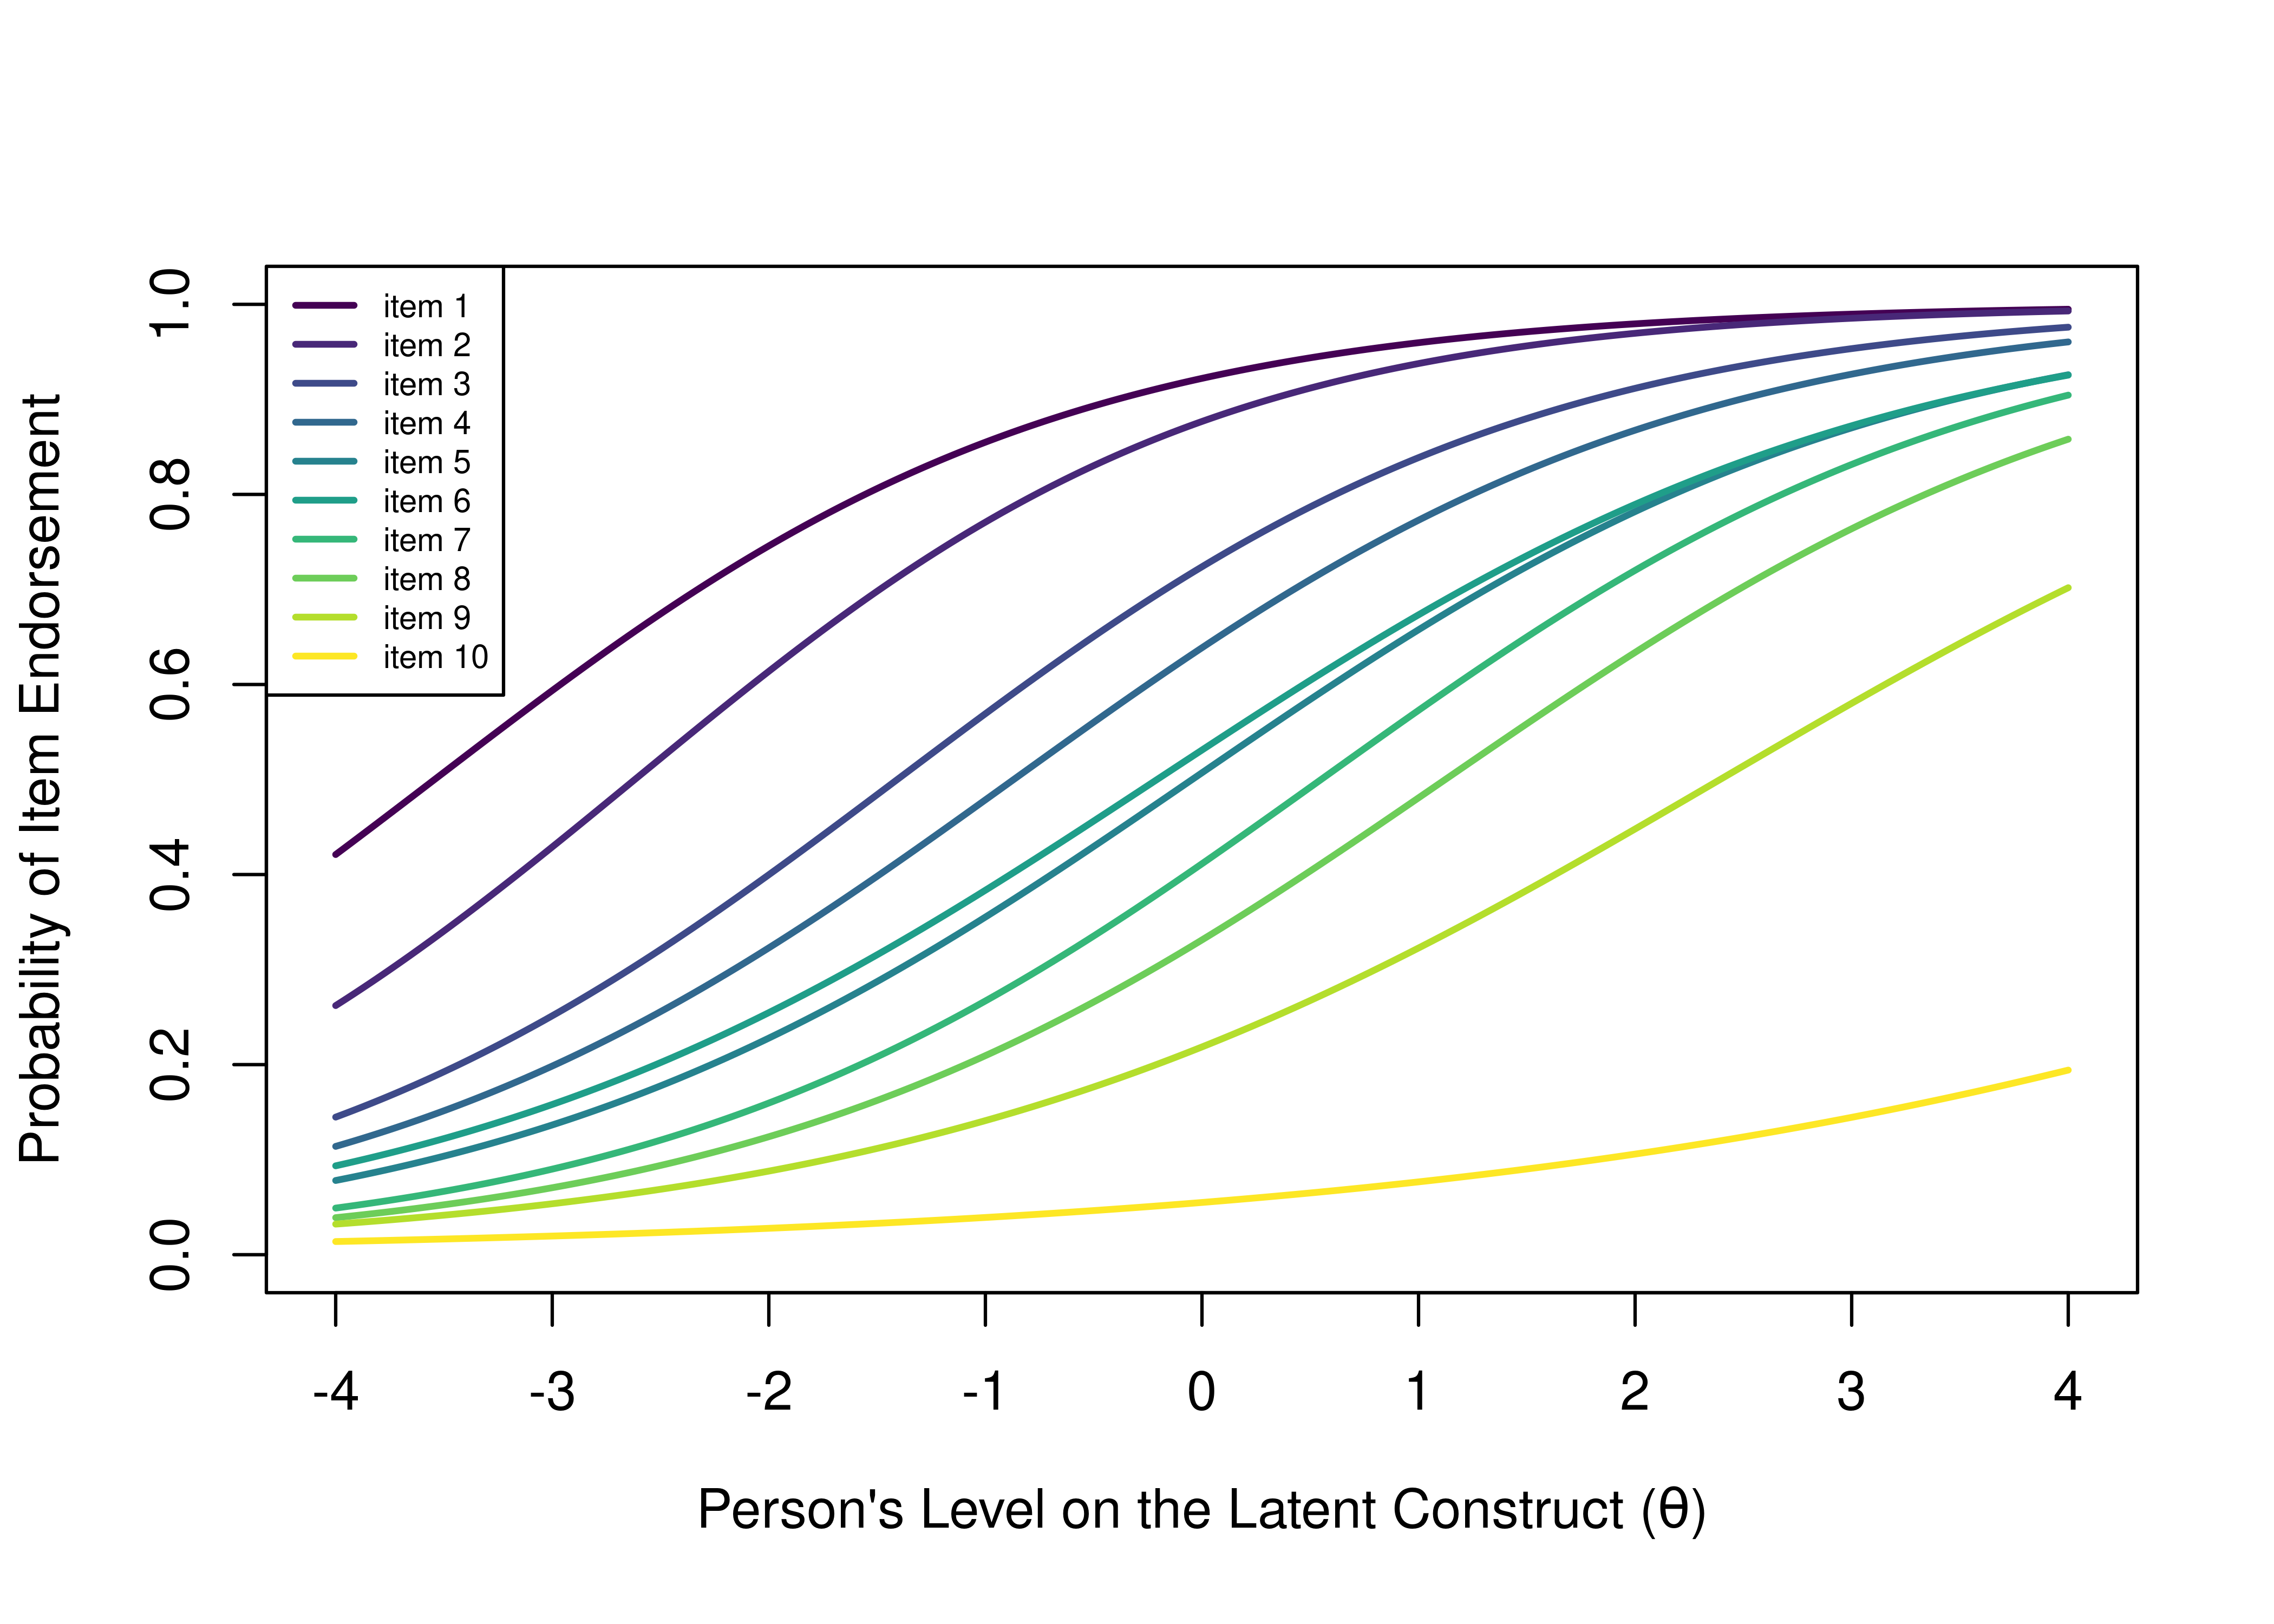 Item Characteristic Curves of the Probability of Endorsement of a Given Item as a Function of the Person's Level on the Latent Construct.